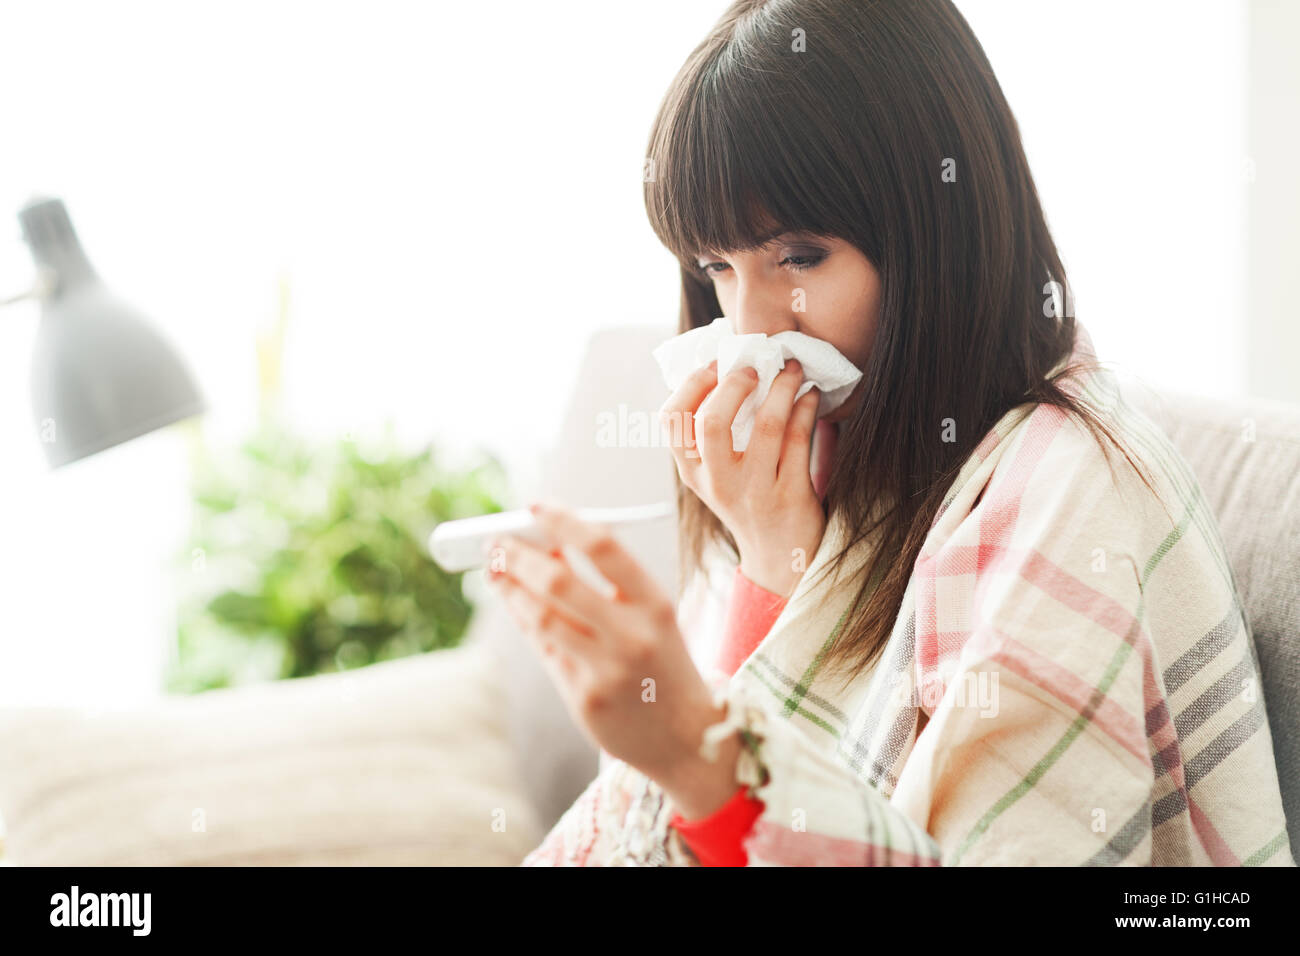 Young sick woman with cold and flu, she is blowing her nose and measuring her body temperature Stock Photo